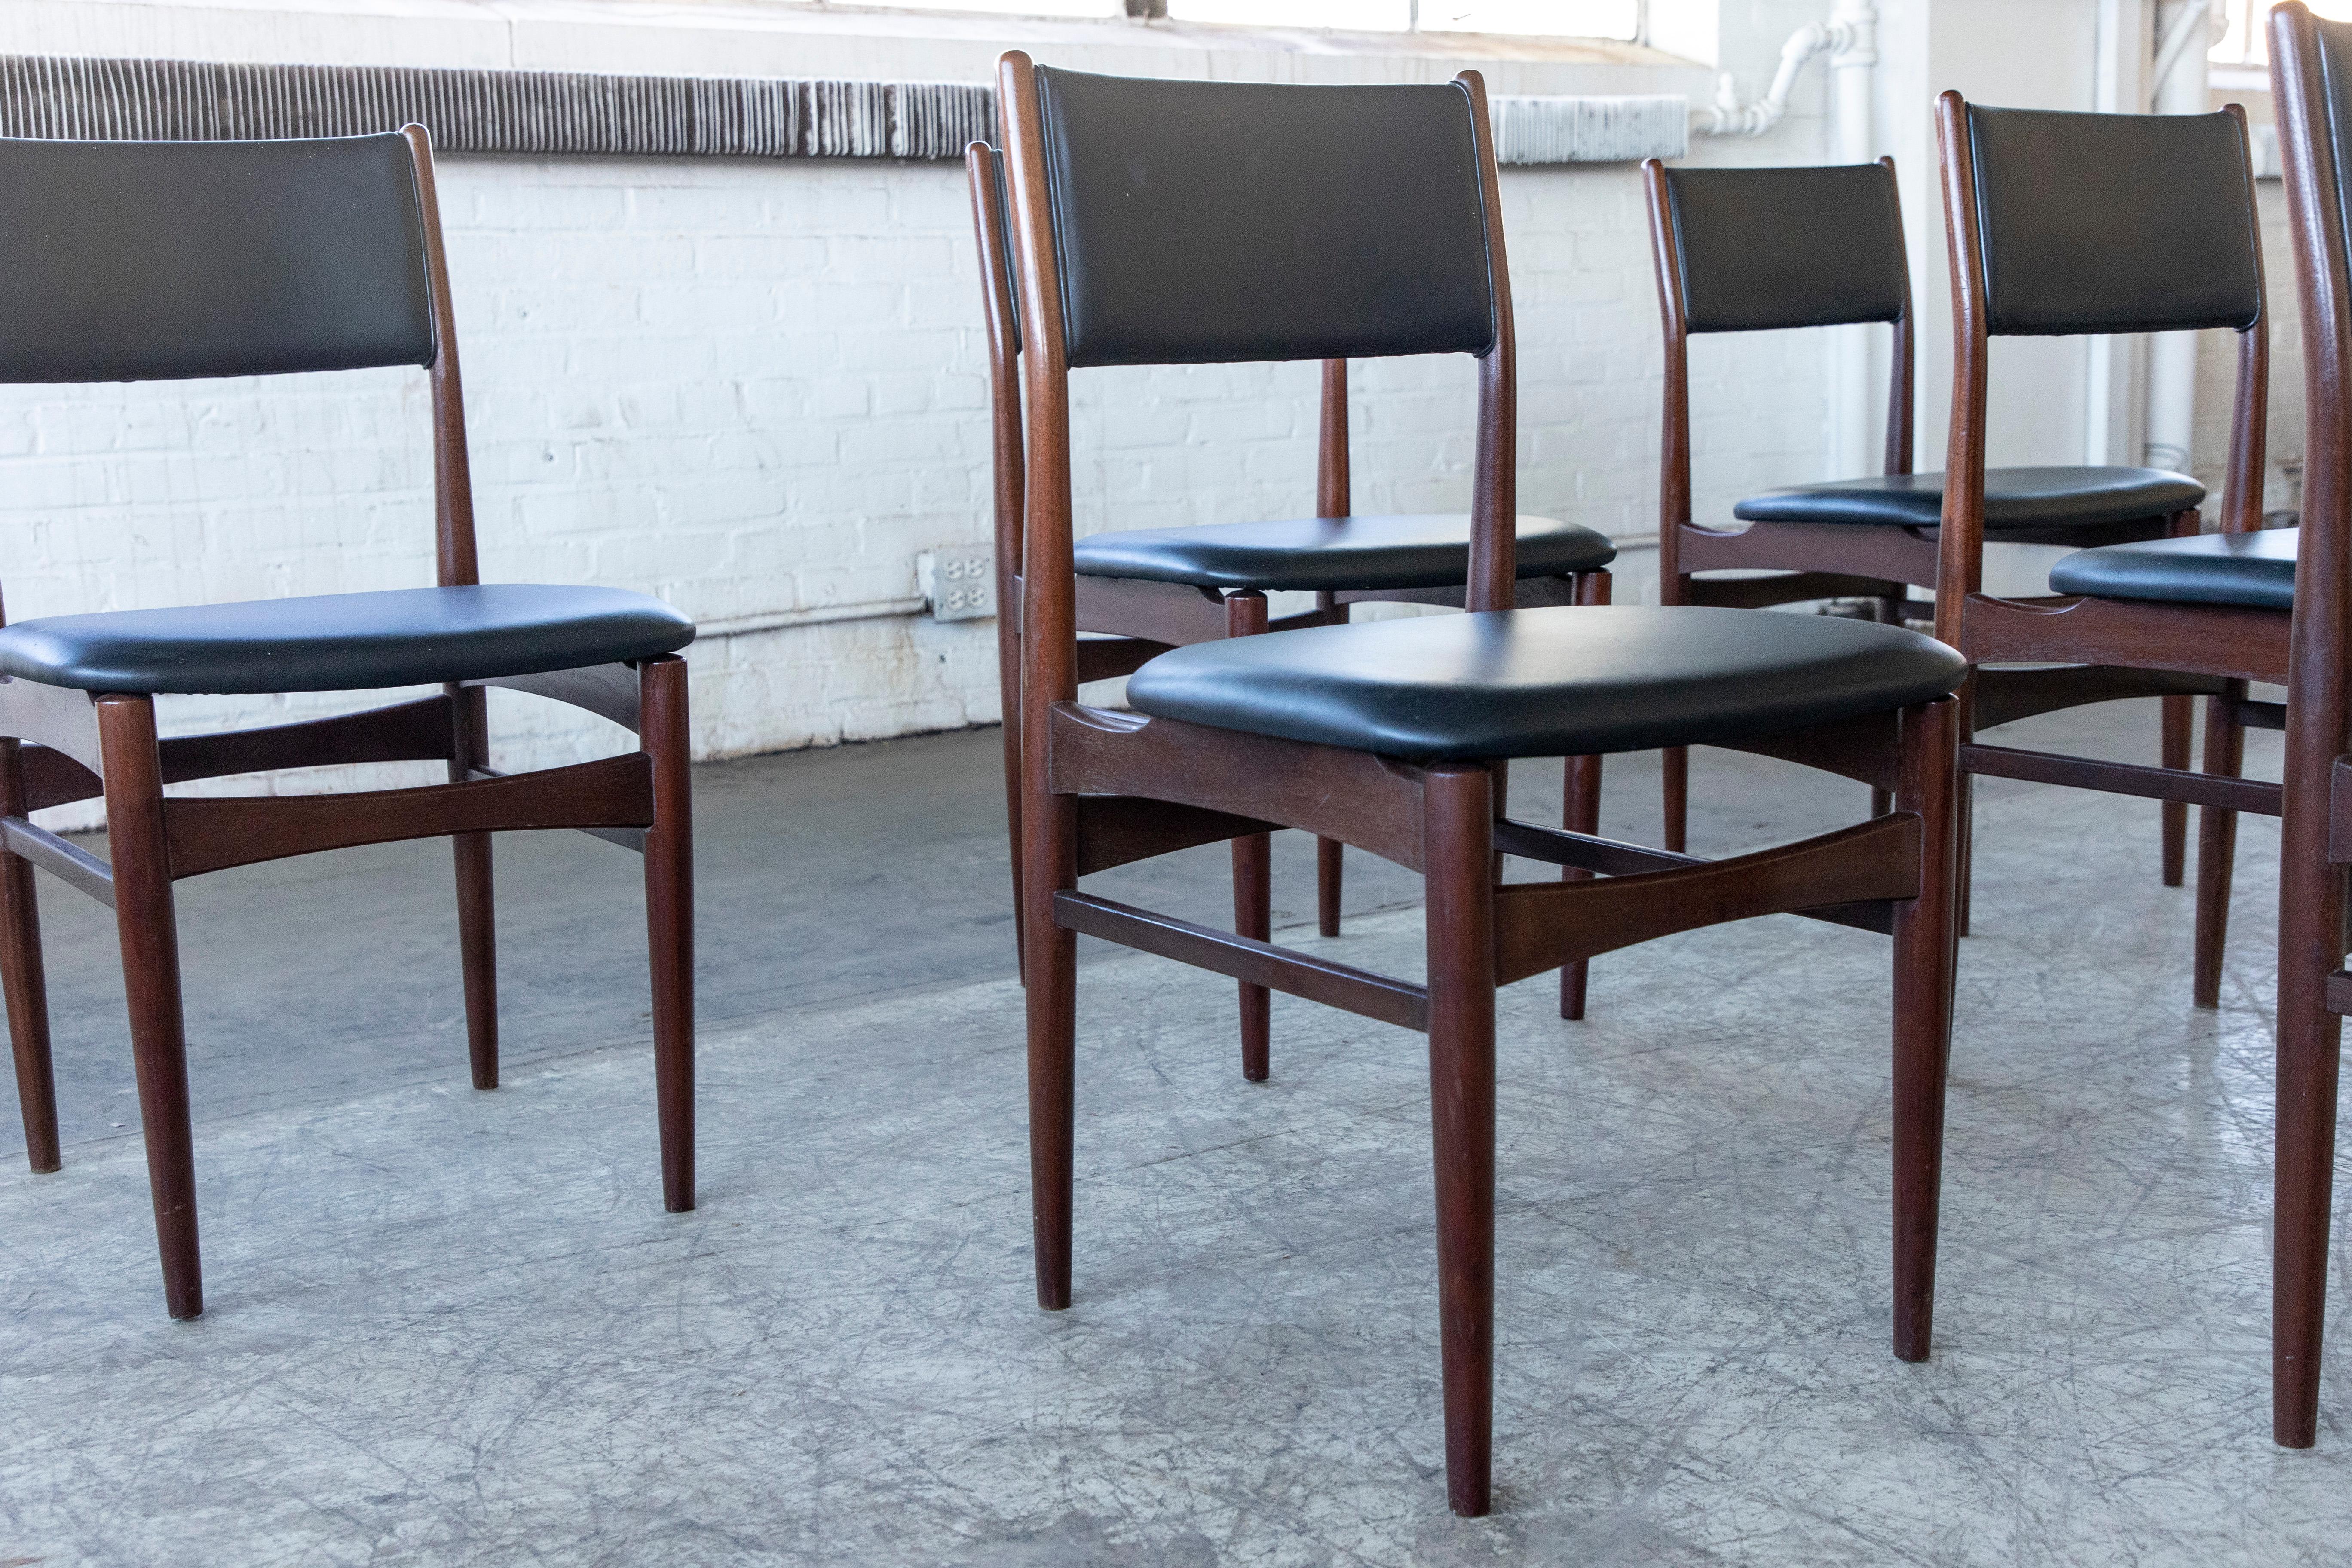 Set of 6 Danish Midcentury Dining Chairs in Teak and Black Leather In Good Condition For Sale In Bridgeport, CT